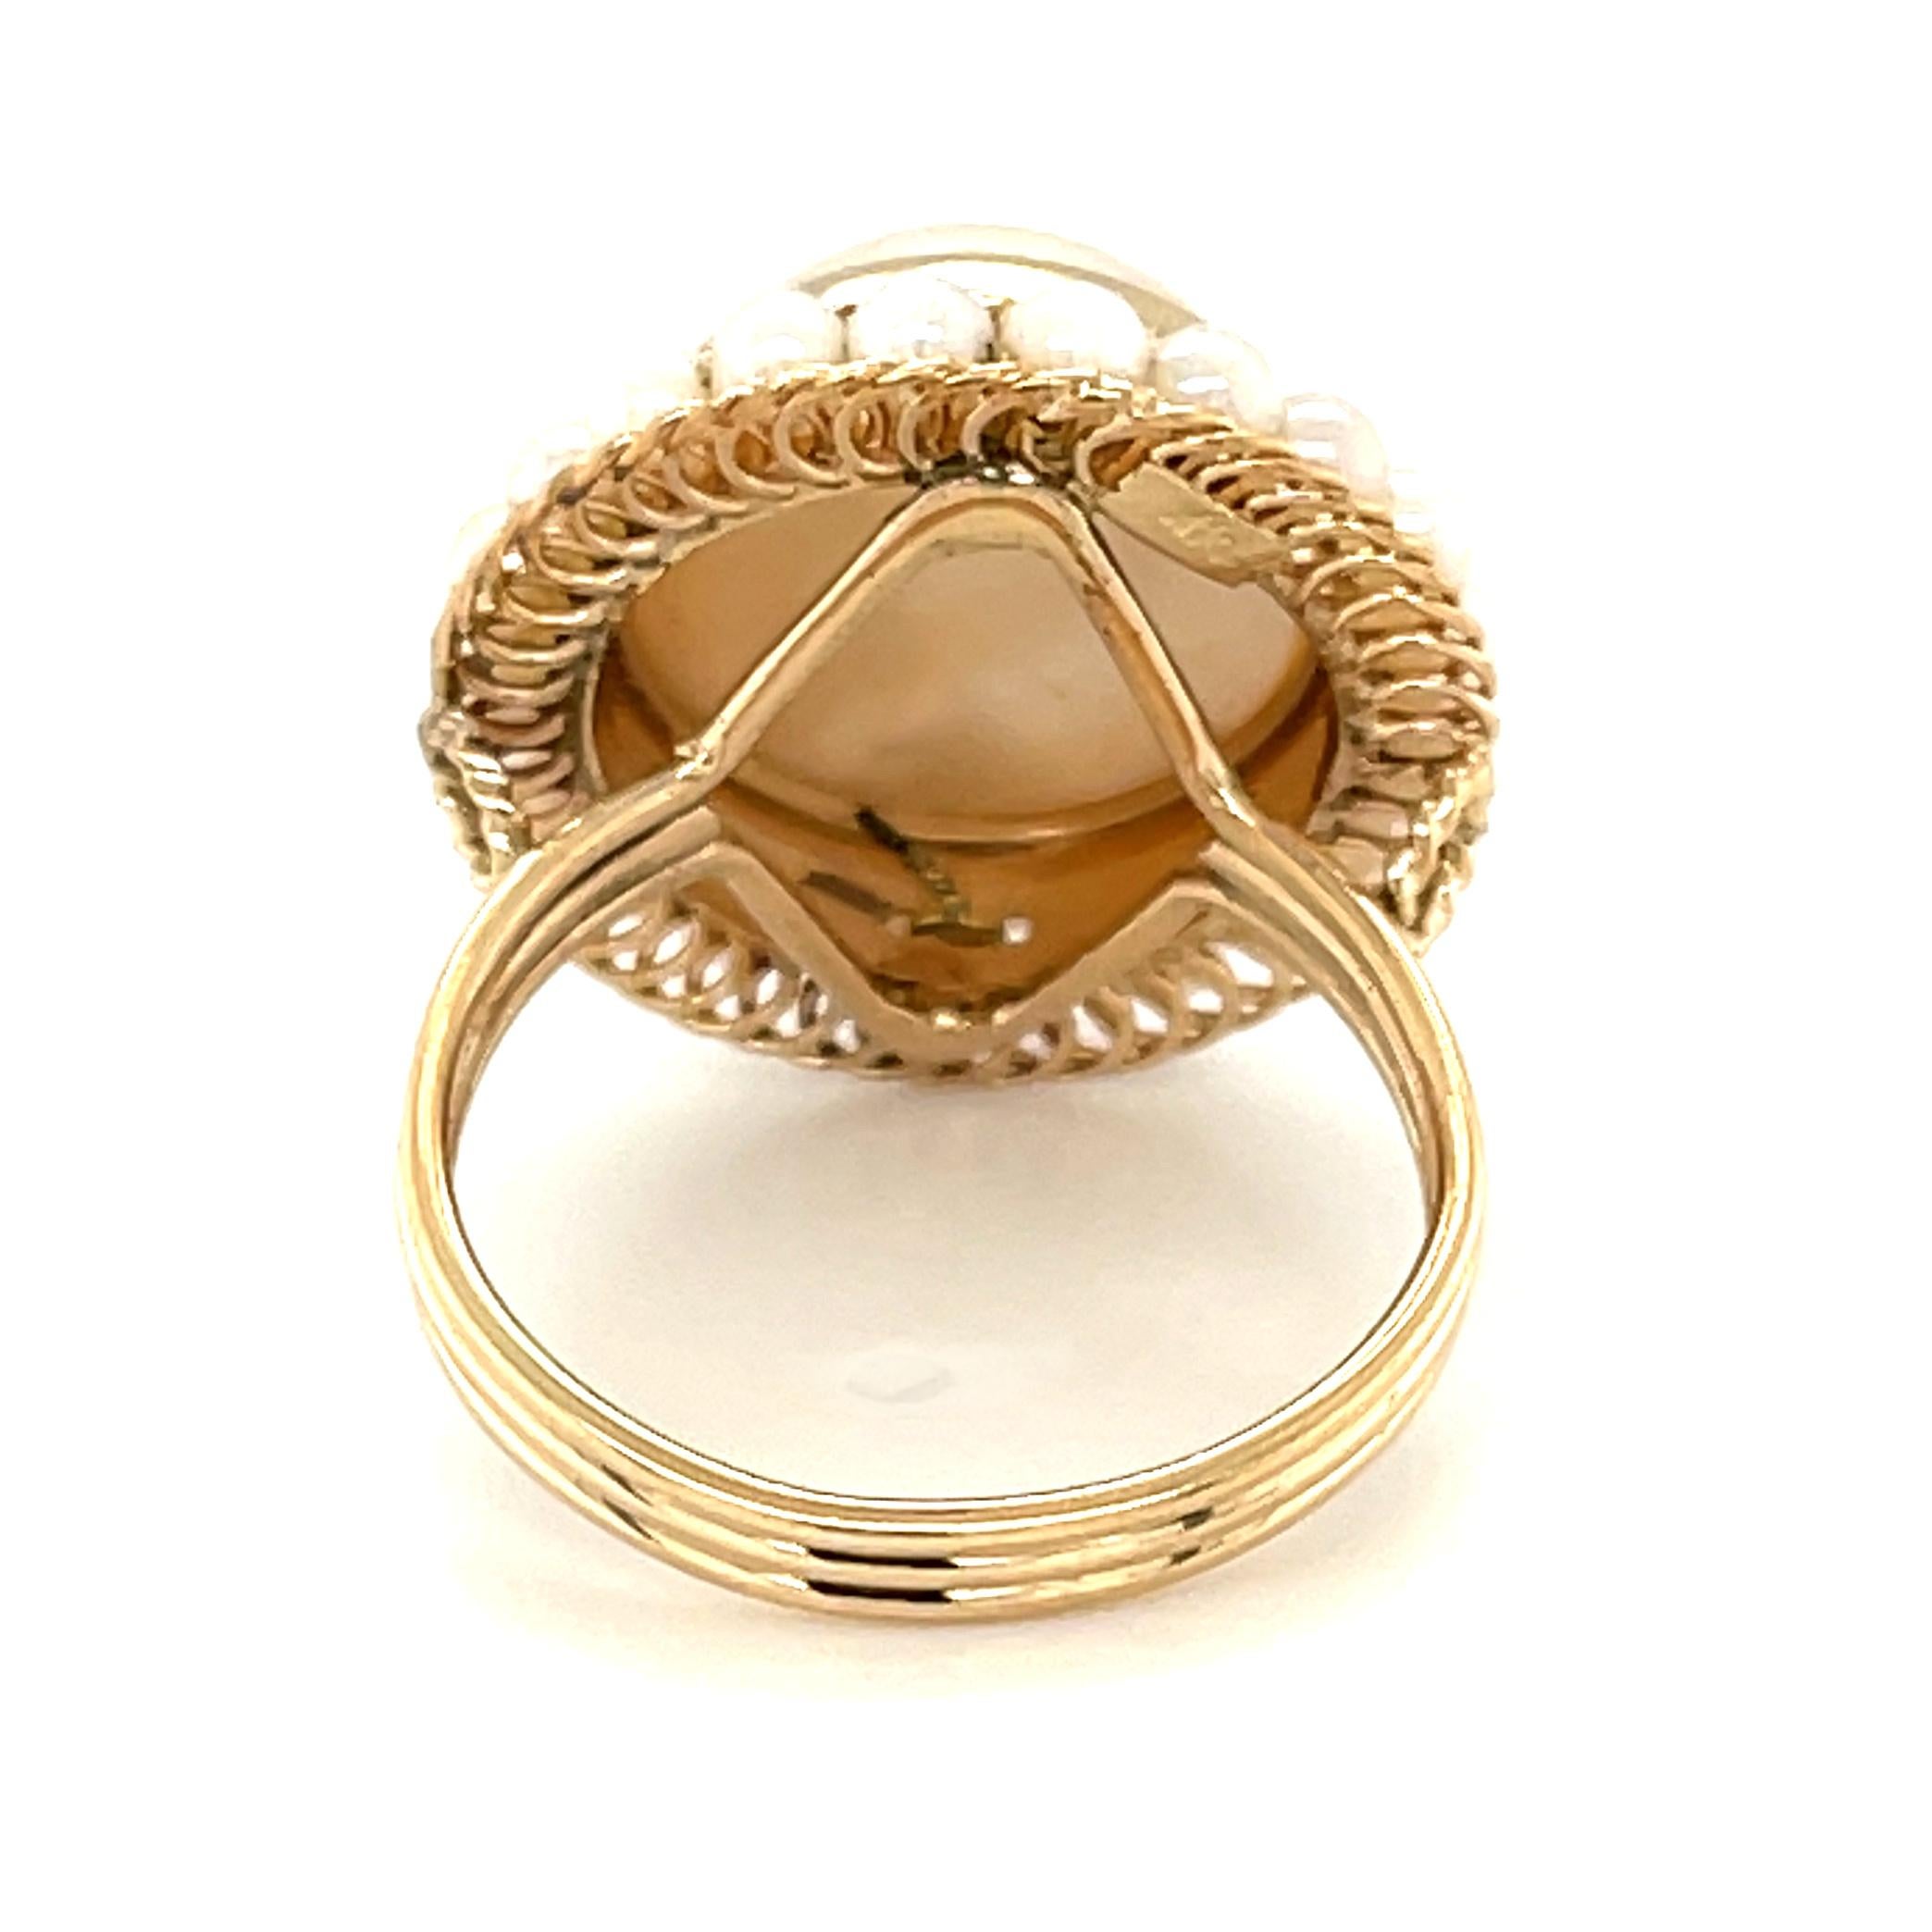 Cabochon Mabe and Seed Pearl Cocktail Ring, Handmade with Yellow Gold Filigree